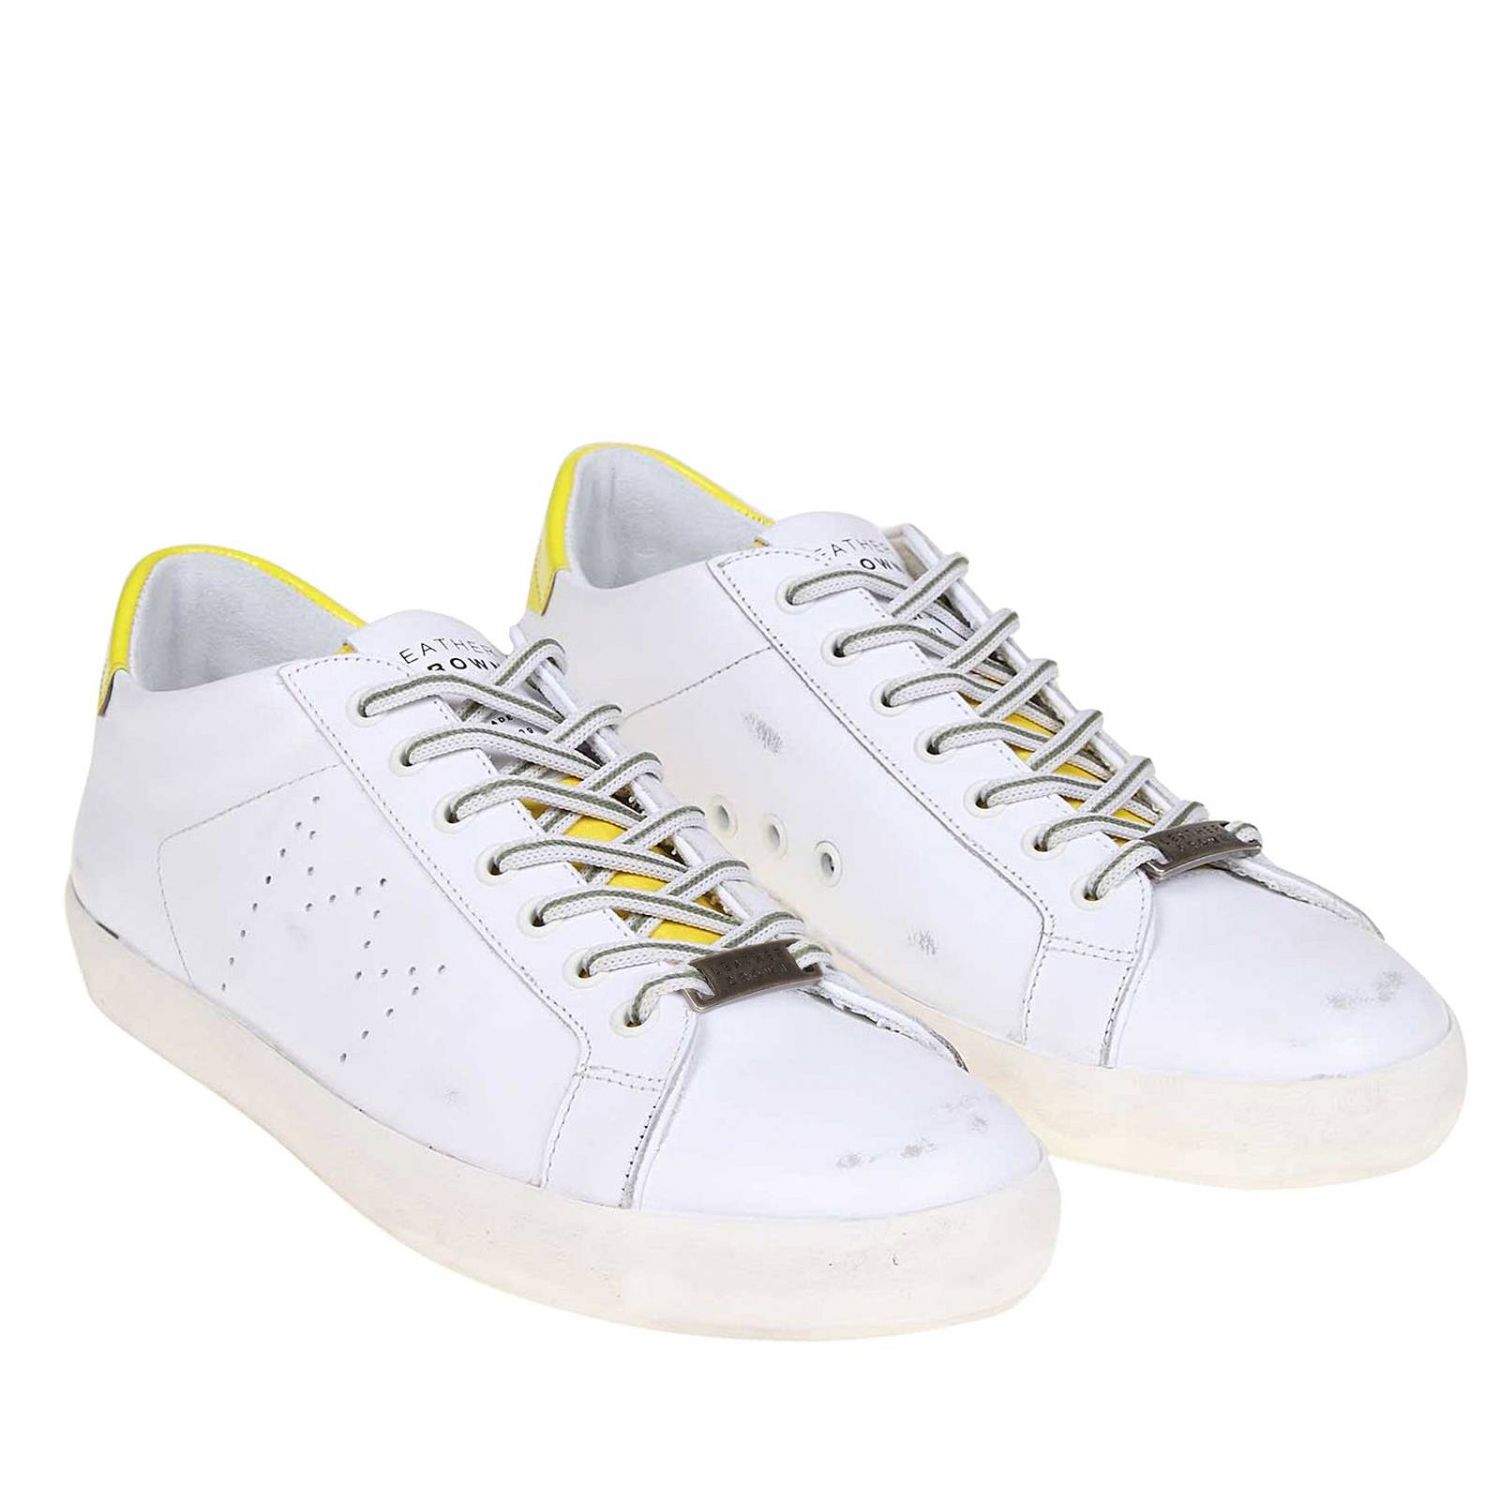 Leather Crown Outlet: Sneakers men - White | Sneakers Leather Crown ...